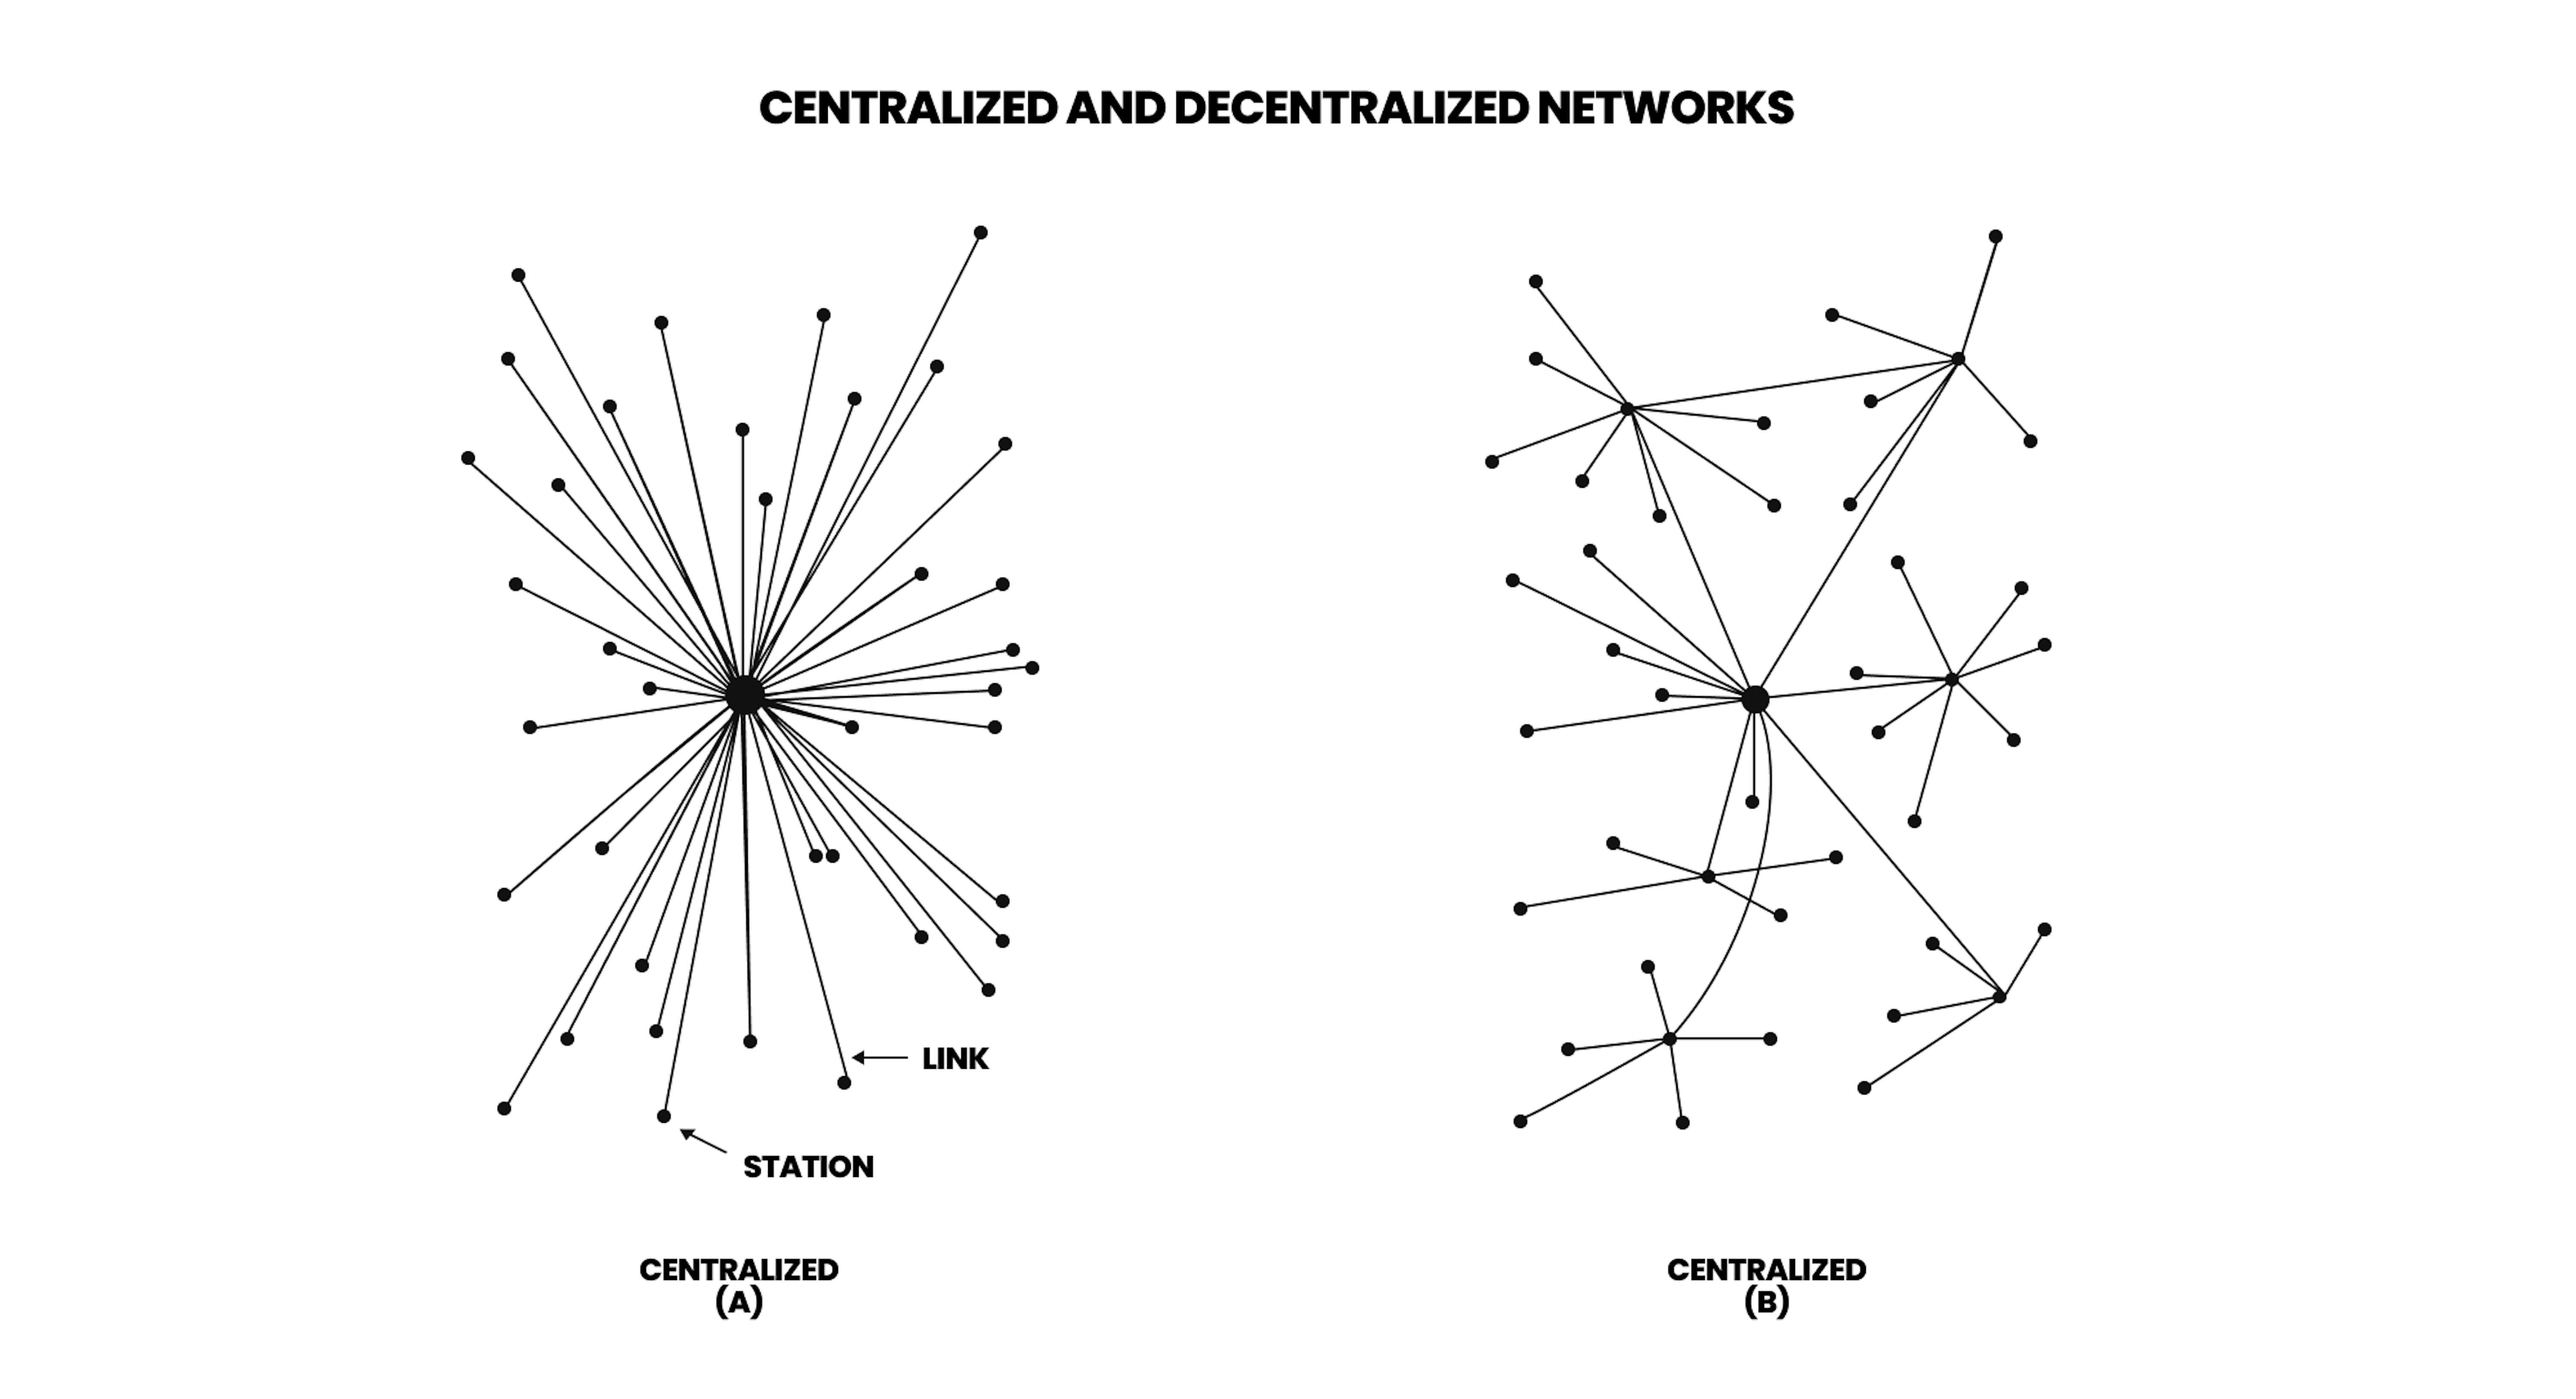 Centralized and decentralized networks